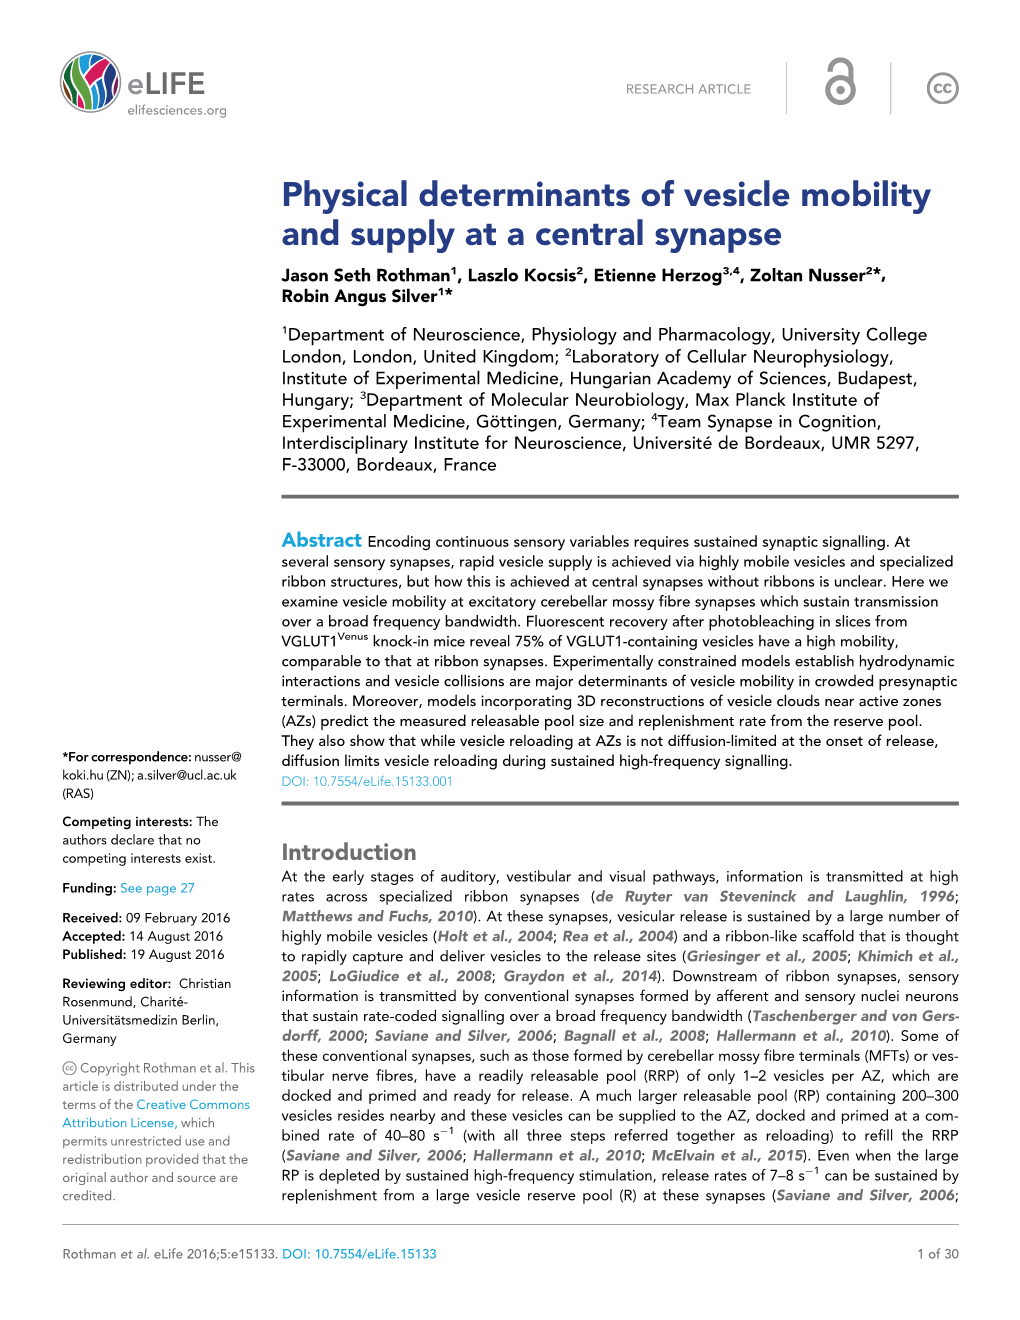 Physical Determinants of Vesicle Mobility and Supply at a Central